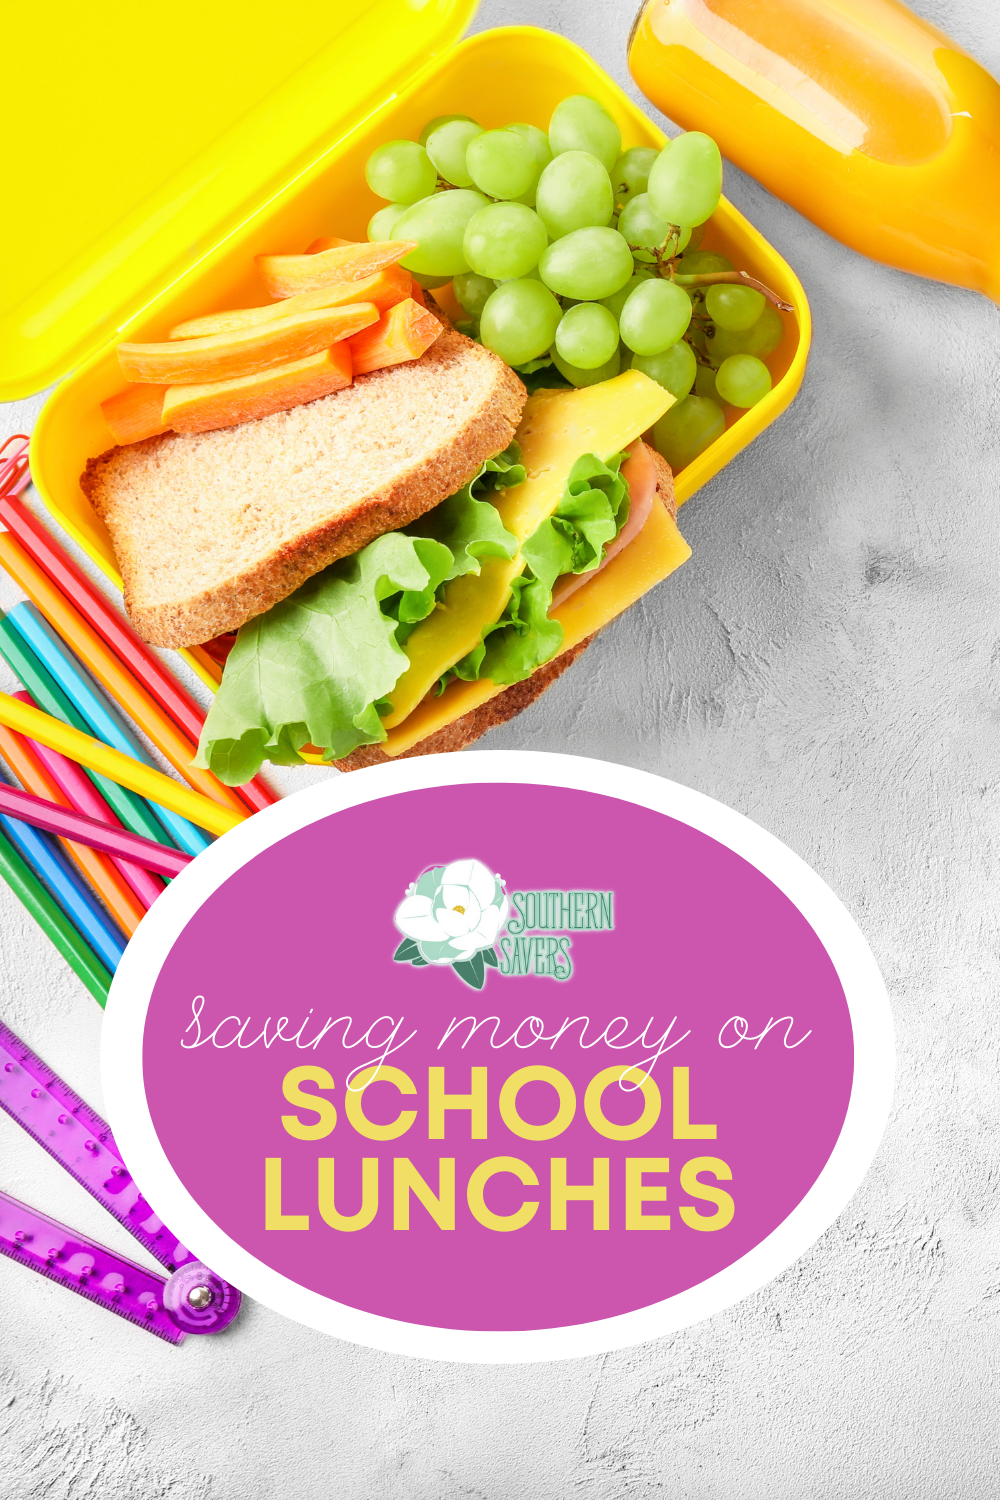 No matter which way you slice it, packing lunches can get overwhelming. Check out our tips for saving money on school lunches!